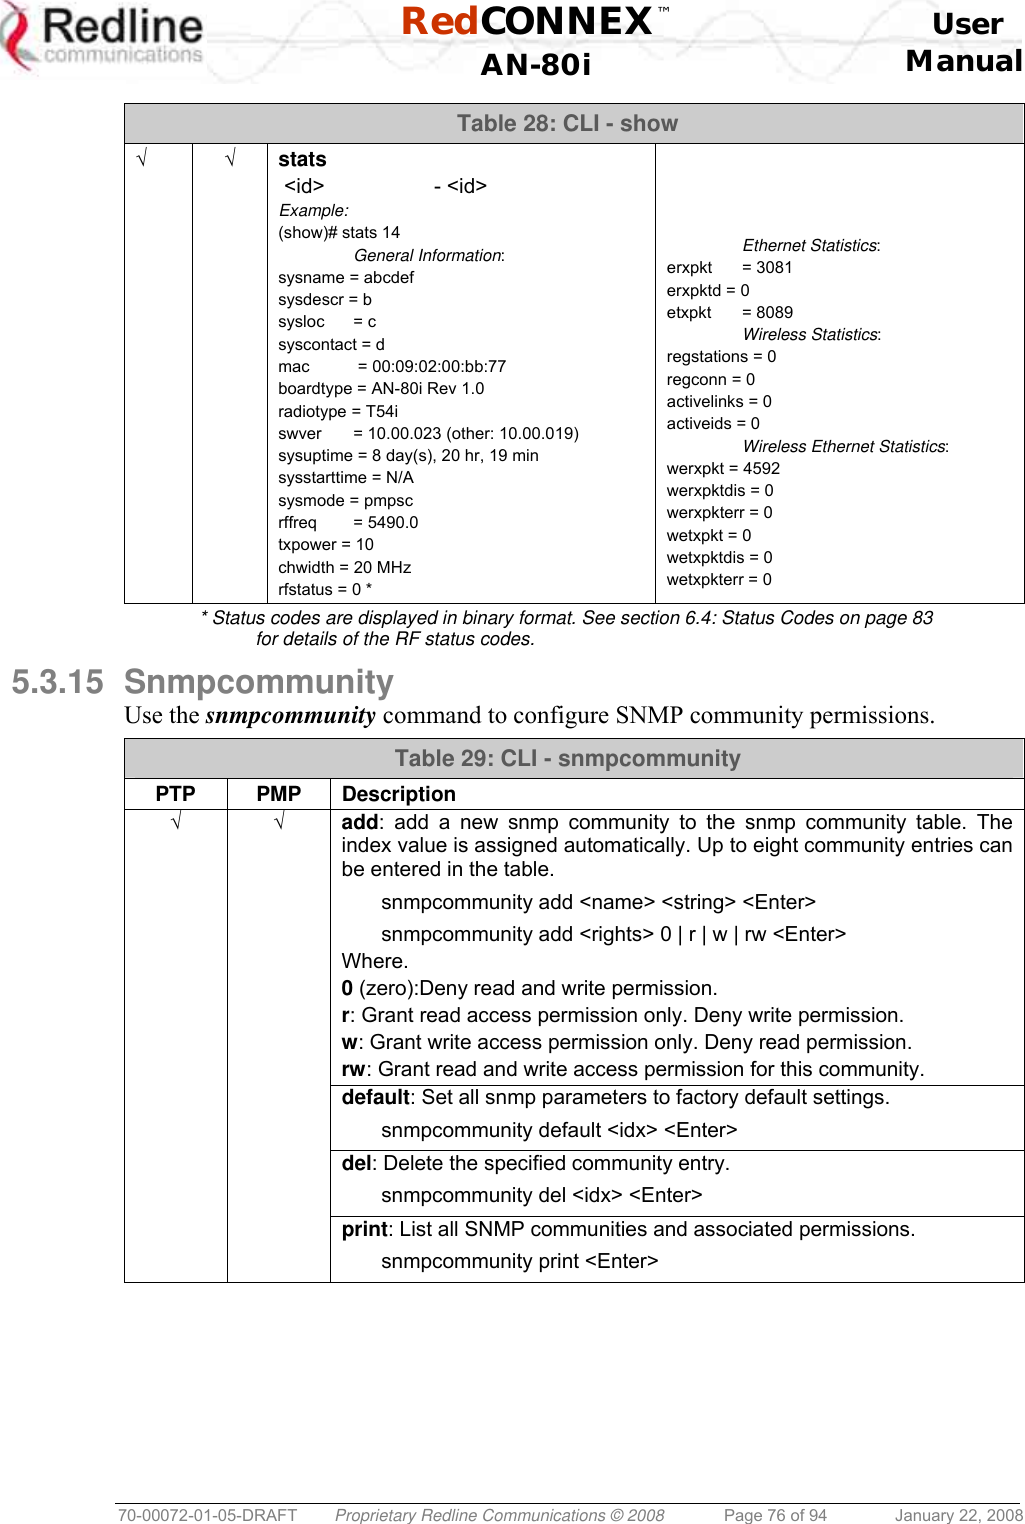  RedCONNEX™    User  AN-80i Manual  70-00072-01-05-DRAFT  Proprietary Redline Communications © 2008  Page 76 of 94  January 22, 2008 Table 28: CLI - show √ √ stats  &lt;id&gt;     - &lt;id&gt; Example: (show)# stats 14  General Information: sysname = abcdef sysdescr = b sysloc = c syscontact = d mac   = 00:09:02:00:bb:77 boardtype = AN-80i Rev 1.0 radiotype = T54i swver  = 10.00.023 (other: 10.00.019) sysuptime = 8 day(s), 20 hr, 19 min sysstarttime = N/A sysmode = pmpsc rffreq = 5490.0 txpower = 10 chwidth = 20 MHz rfstatus = 0 *       Ethernet Statistics: erxpkt = 3081 erxpktd = 0 etxpkt = 8089  Wireless Statistics: regstations = 0 regconn = 0 activelinks = 0 activeids = 0  Wireless Ethernet Statistics: werxpkt = 4592 werxpktdis = 0 werxpkterr = 0 wetxpkt = 0 wetxpktdis = 0 wetxpkterr = 0 * Status codes are displayed in binary format. See section 6.4: Status Codes on page 83 for details of the RF status codes. 5.3.15 Snmpcommunity Use the snmpcommunity command to configure SNMP community permissions. Table 29: CLI - snmpcommunity PTP PMP Description √ √ add: add a new snmp community to the snmp community table. The index value is assigned automatically. Up to eight community entries can be entered in the table.   snmpcommunity add &lt;name&gt; &lt;string&gt; &lt;Enter&gt;   snmpcommunity add &lt;rights&gt; 0 | r | w | rw &lt;Enter&gt; Where. 0 (zero):Deny read and write permission. r: Grant read access permission only. Deny write permission. w: Grant write access permission only. Deny read permission. rw: Grant read and write access permission for this community.   default: Set all snmp parameters to factory default settings.   snmpcommunity default &lt;idx&gt; &lt;Enter&gt;   del: Delete the specified community entry.   snmpcommunity del &lt;idx&gt; &lt;Enter&gt;   print: List all SNMP communities and associated permissions.   snmpcommunity print &lt;Enter&gt;  